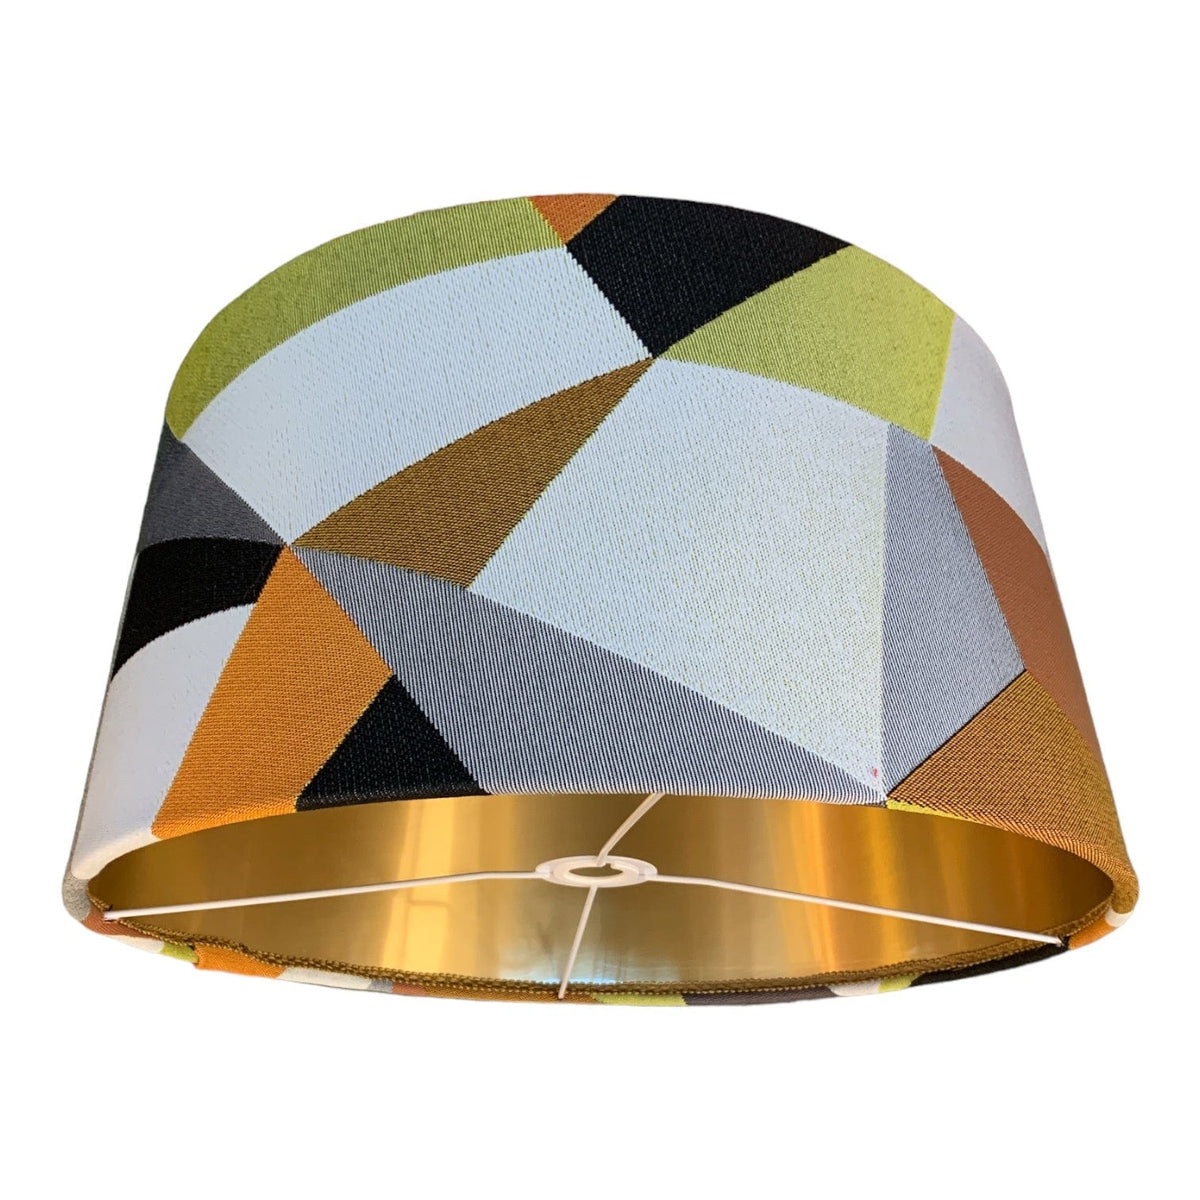 Donghia Gold Lined 20" Open Cone Lampshade Little & Fox